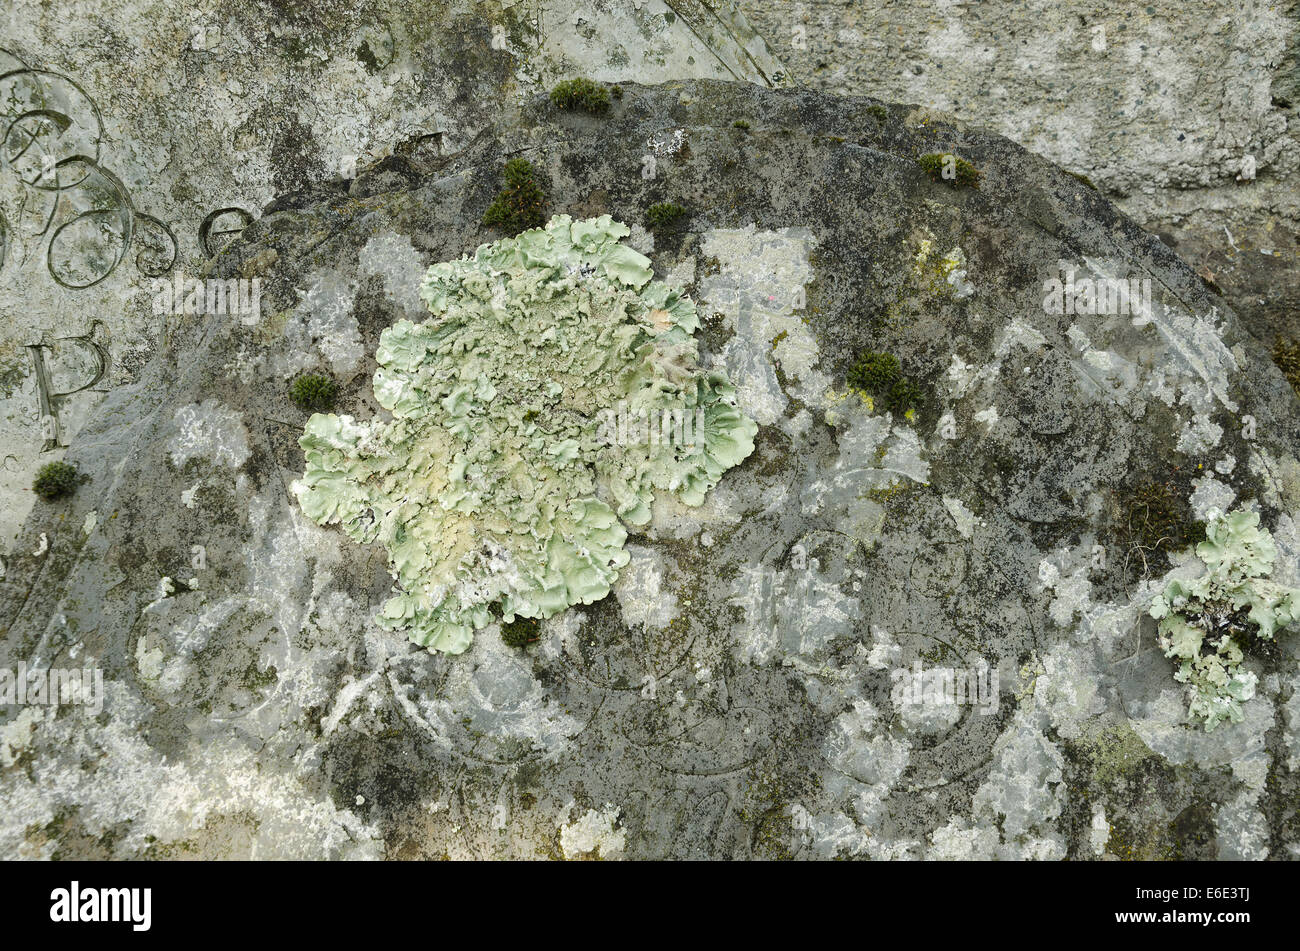 Foliose leafy lichen round ring patch patches invasion on limestone old deteriorating gravestone Stock Photo